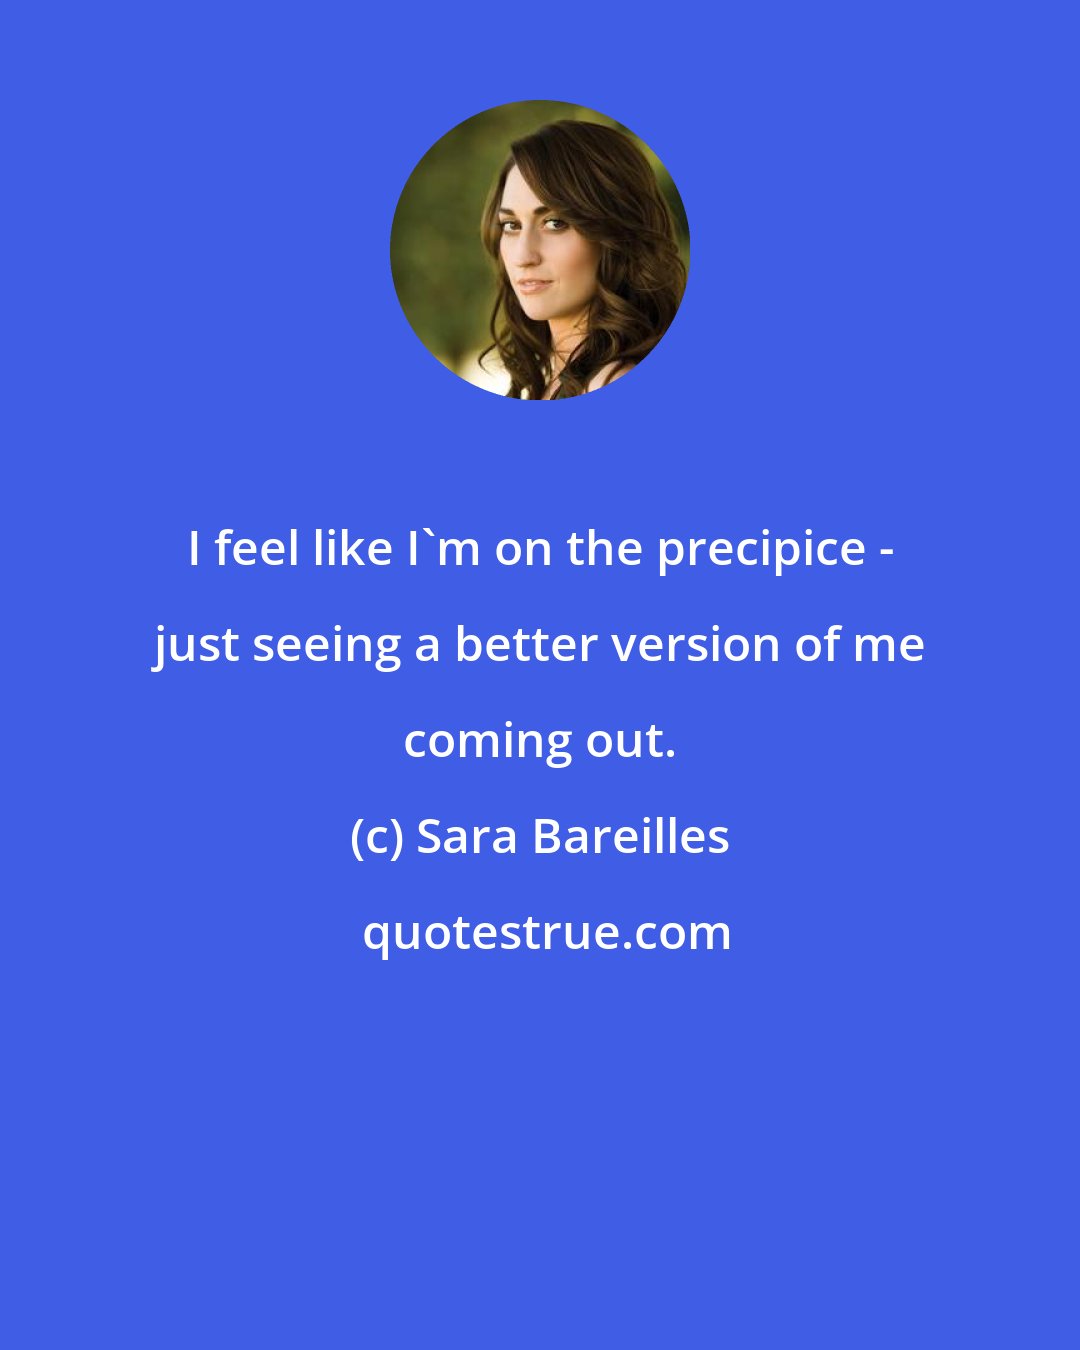 Sara Bareilles: I feel like I'm on the precipice - just seeing a better version of me coming out.